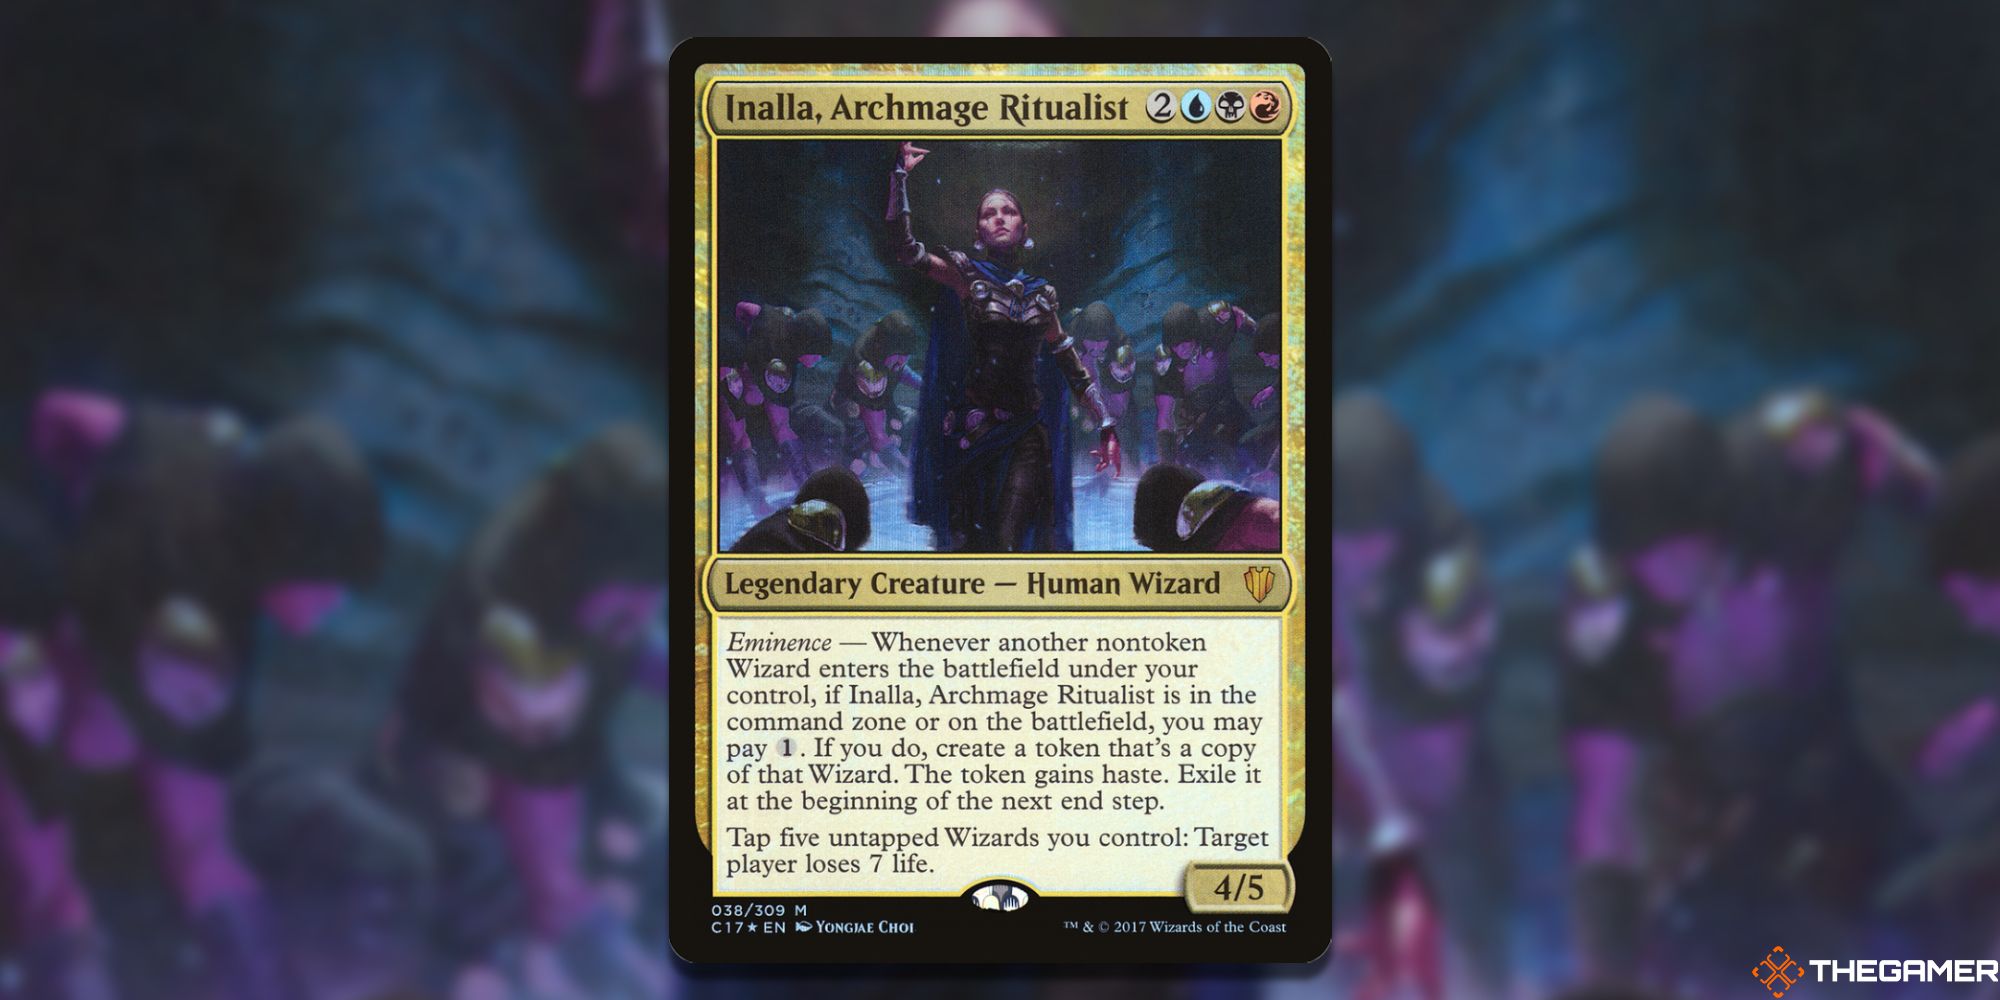 Image of the Inalla, Archmage Ritualist card in Magic: The Gathering, with art by Yongjae Choi